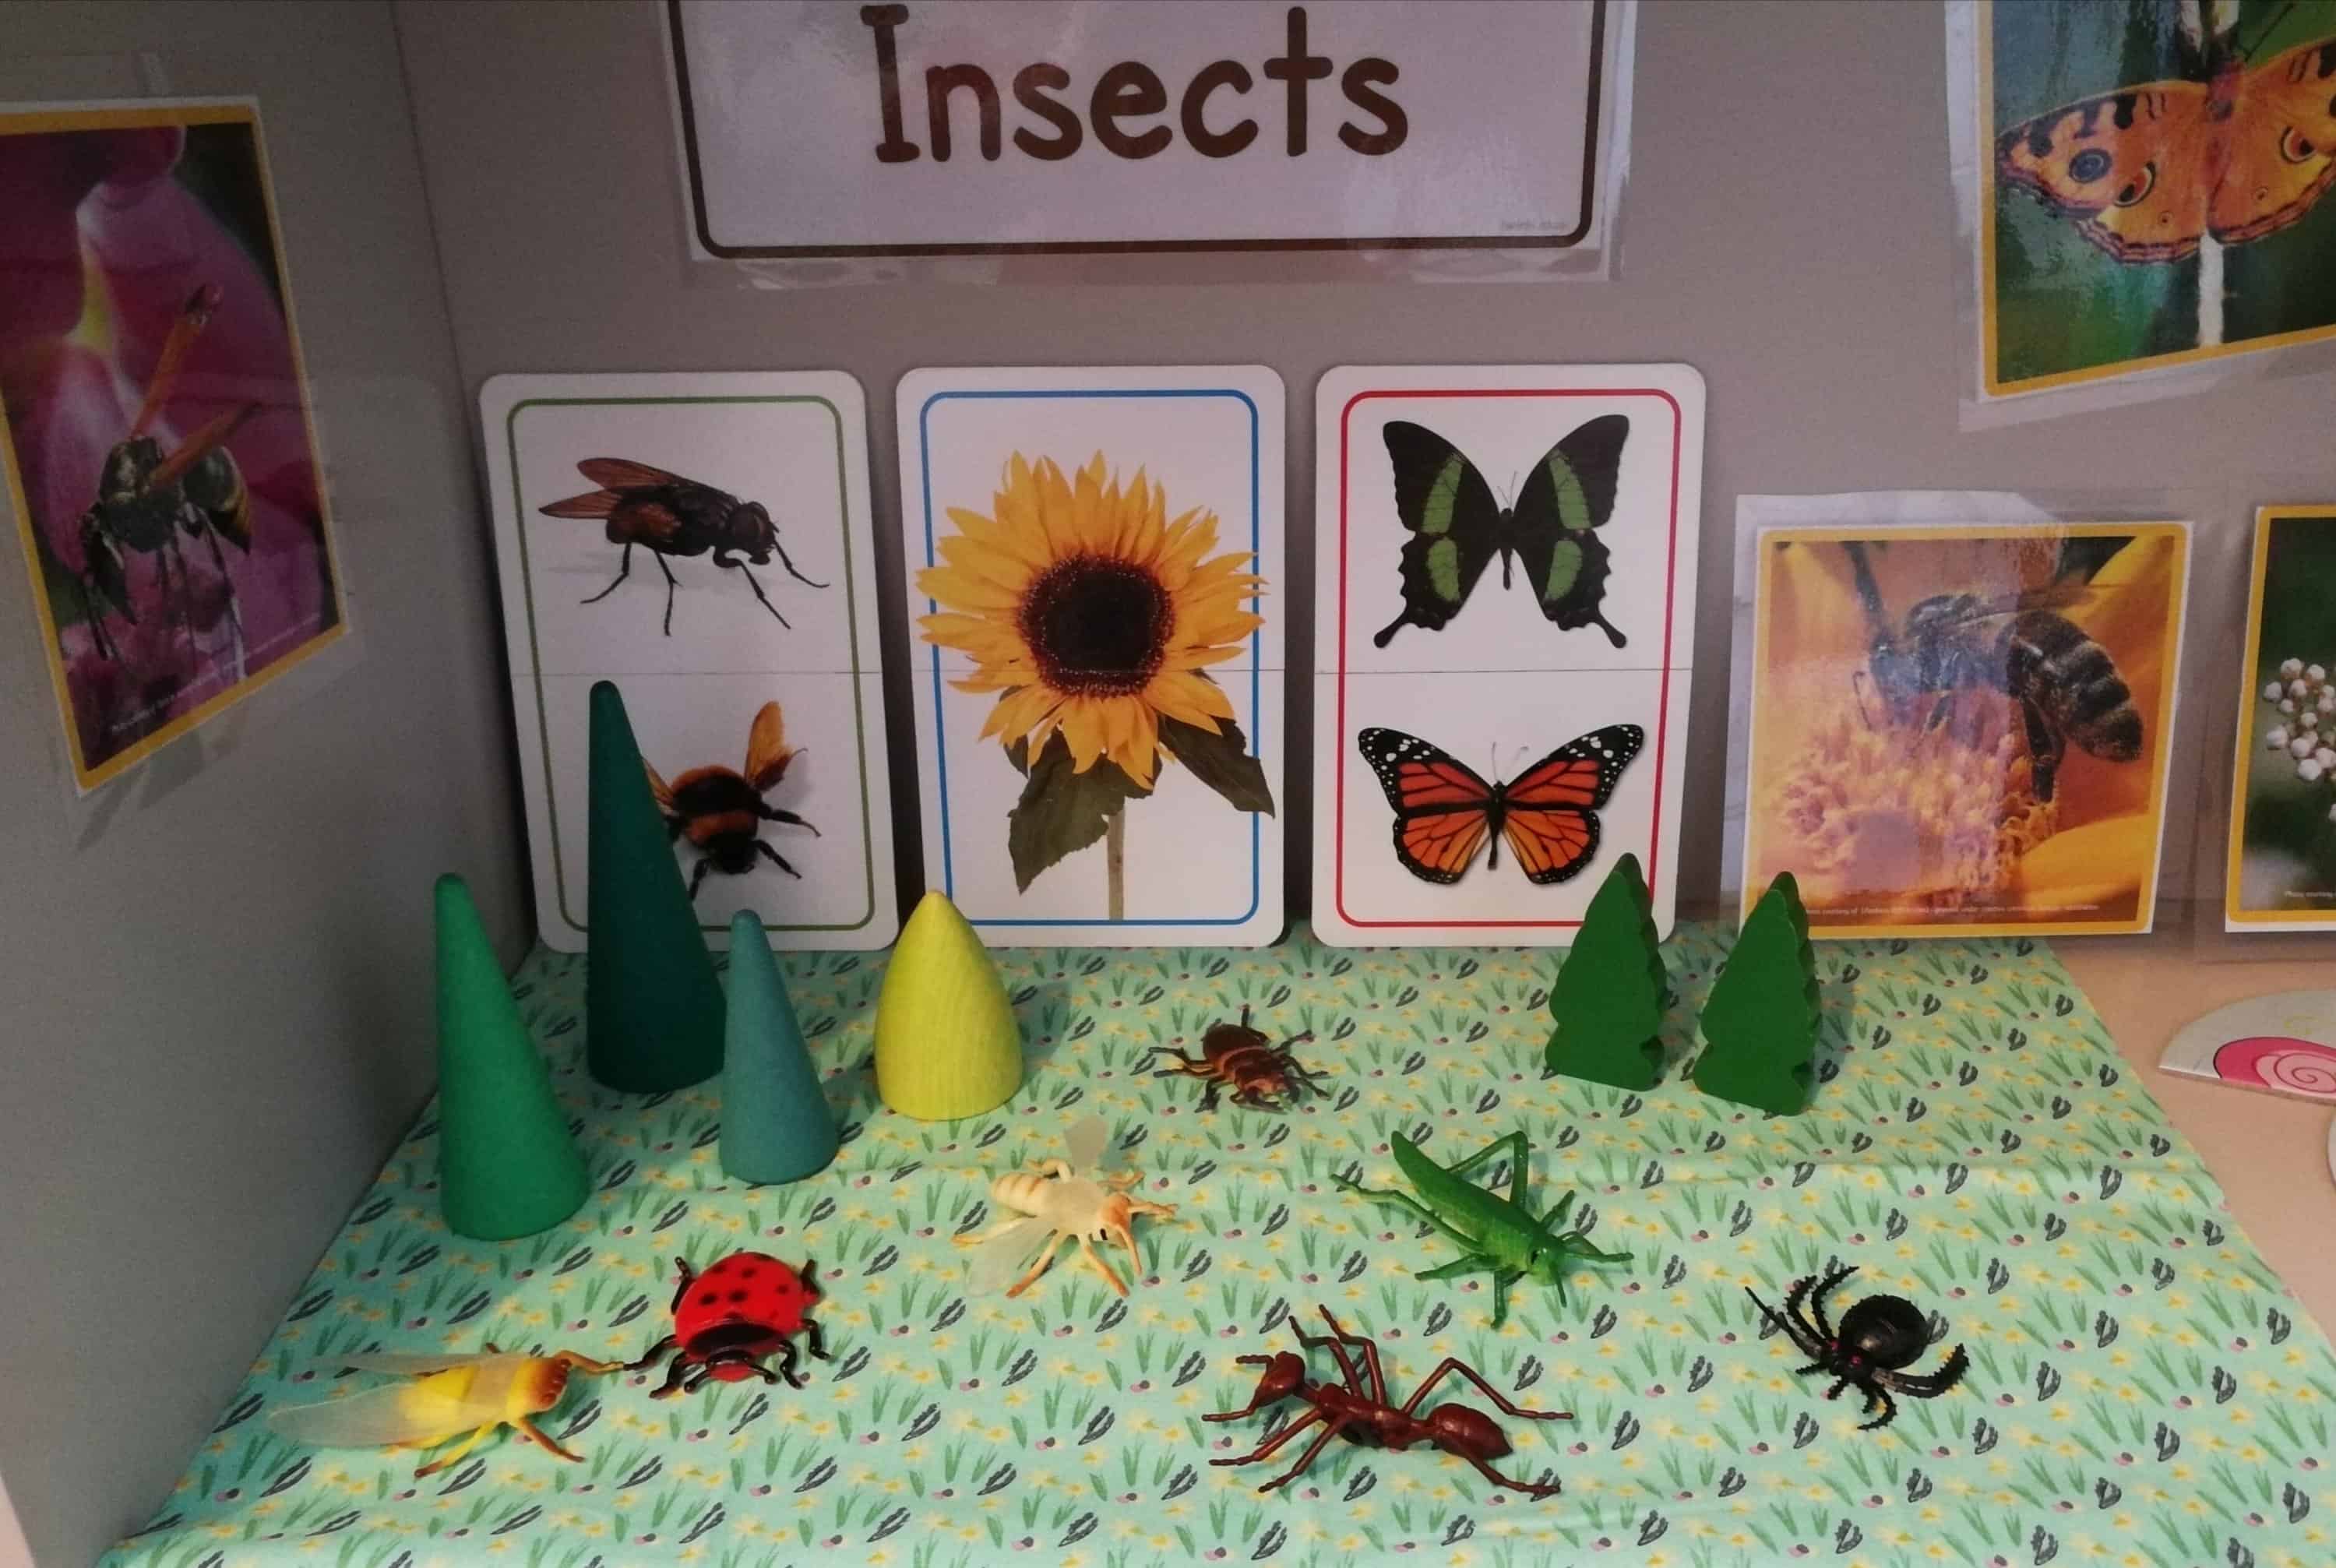 Shelfie - Theme - Minibeasts - Insects - Animals - Caterpillars - Butterflies - Moths - Matching - Communication and Language - Fine Motor Skills - Puzzles - Games - Toddler ideas - Preschooler - Books - Small World - Grimms Toys - Wooden Toys